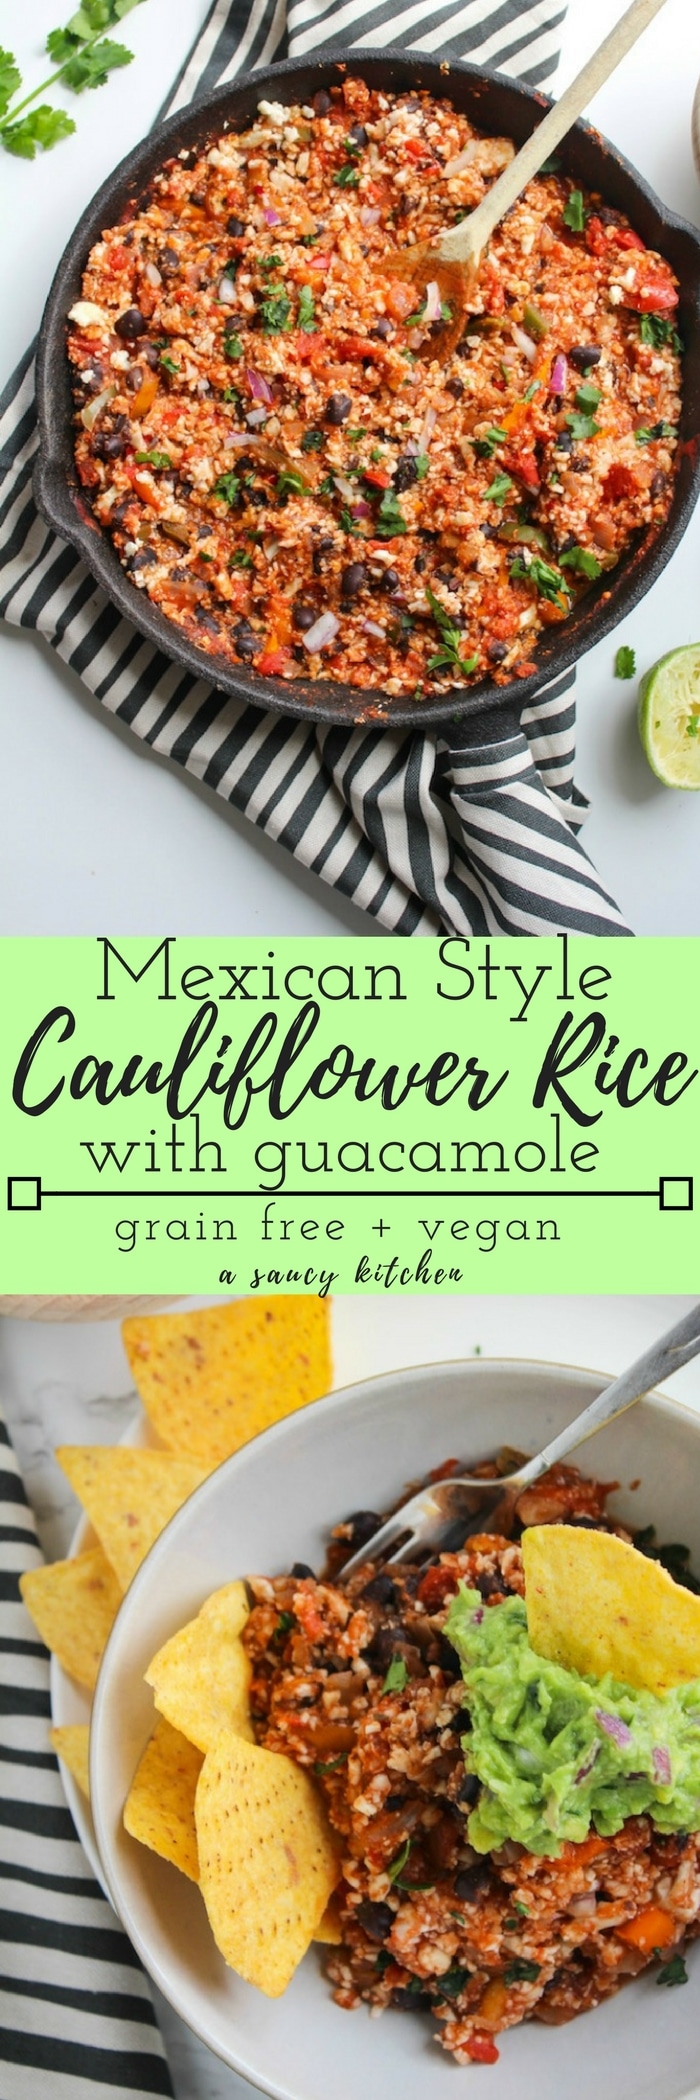 Mexican Style Cauliflower Rice with guacamole – an easy, one skillet plant based dinner | Grain Free, Vegan, Gluten Free